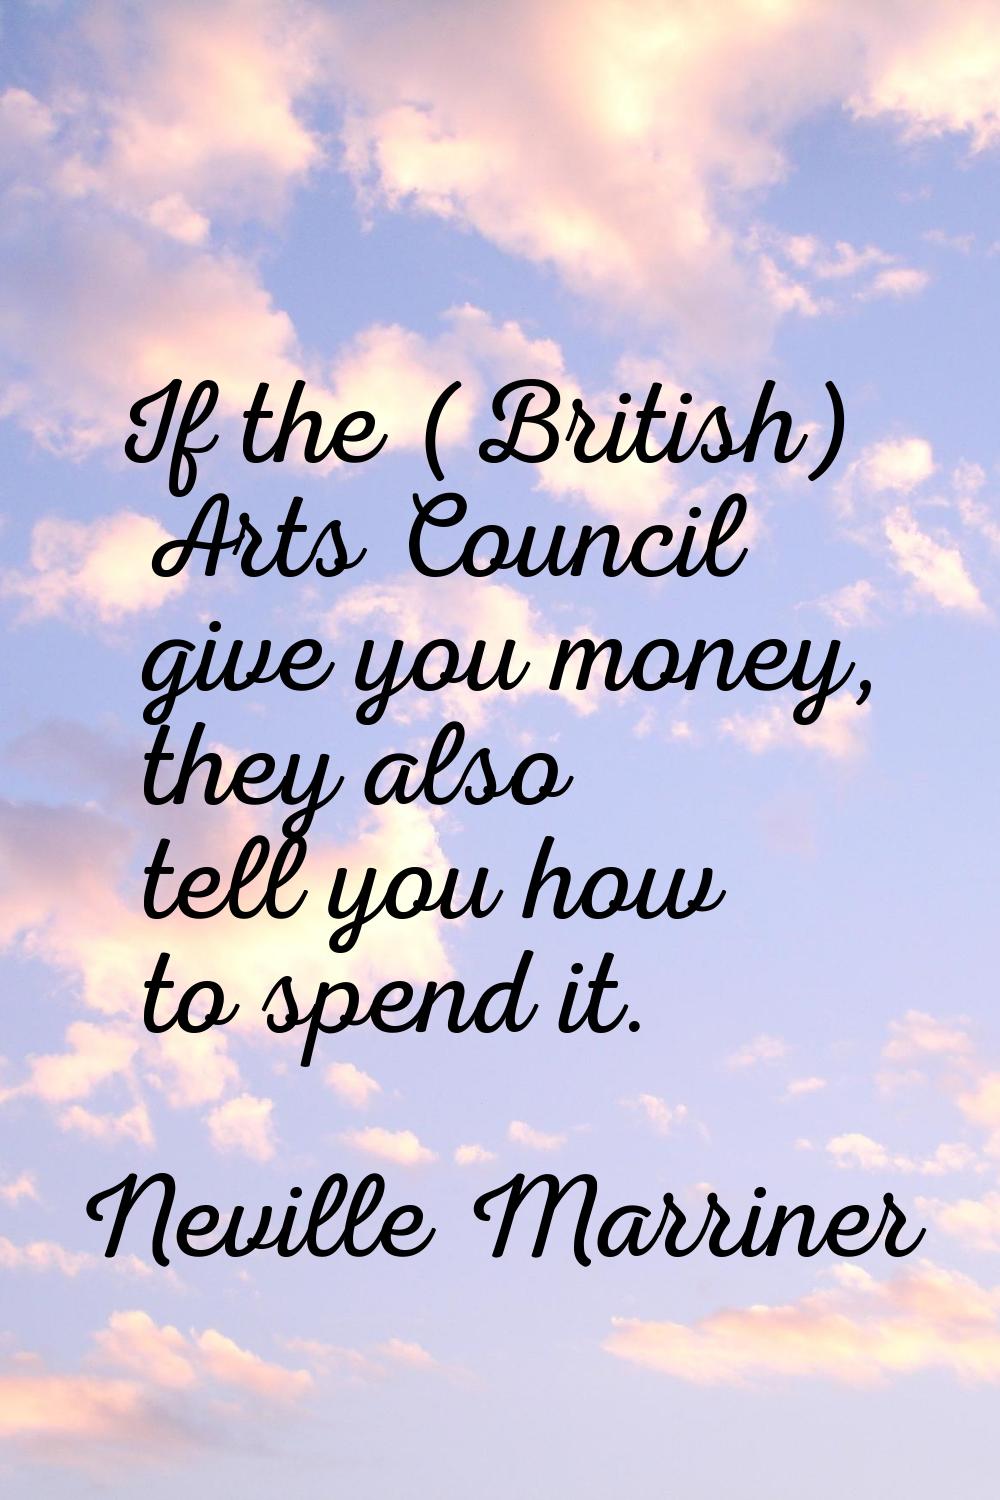 If the (British) Arts Council give you money, they also tell you how to spend it.